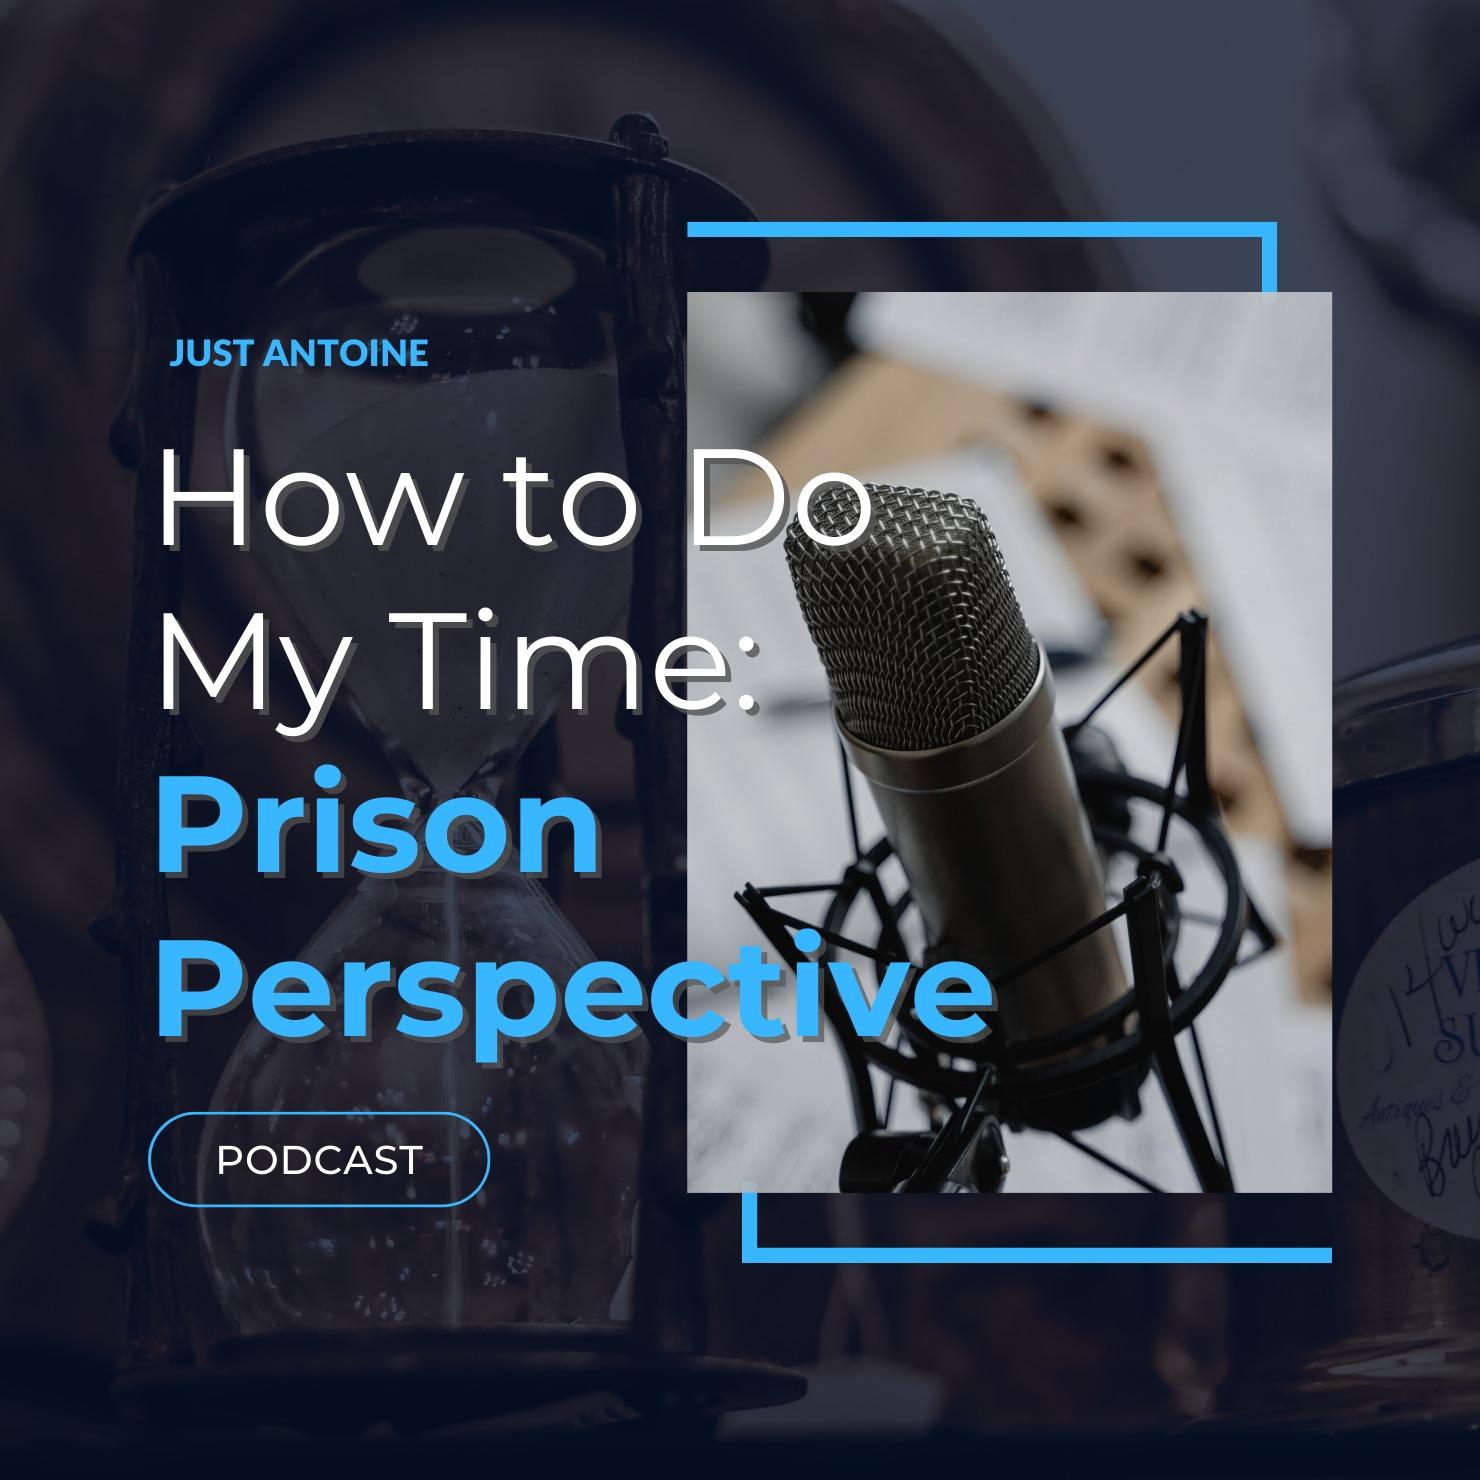 How to Do My Time: Prison Perspective